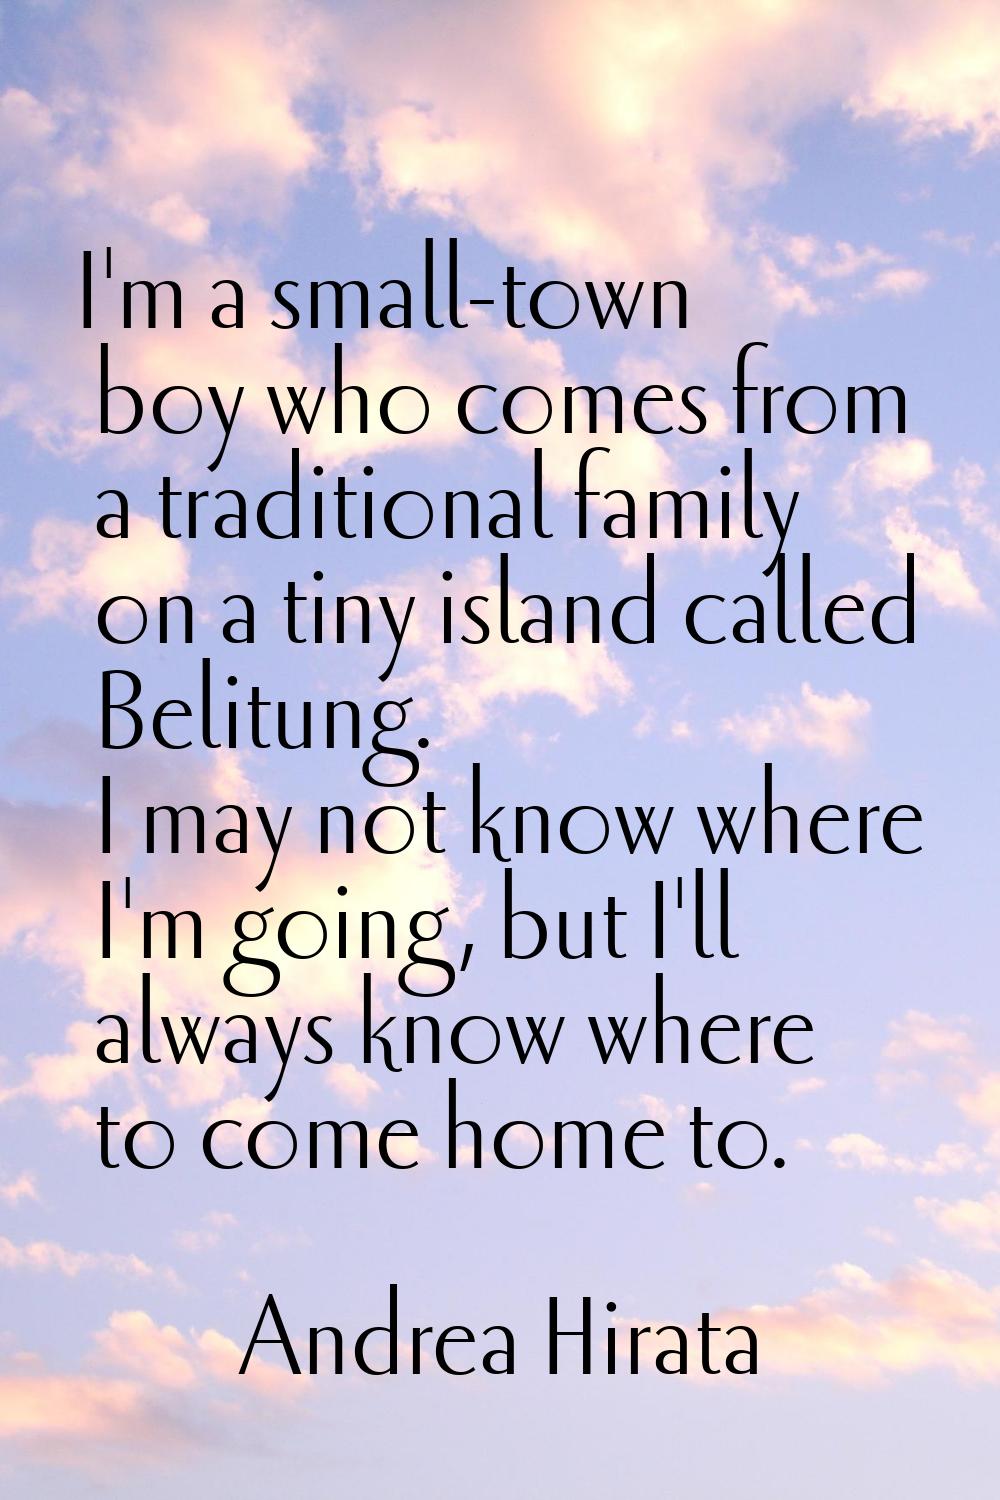 I'm a small-town boy who comes from a traditional family on a tiny island called Belitung. I may no